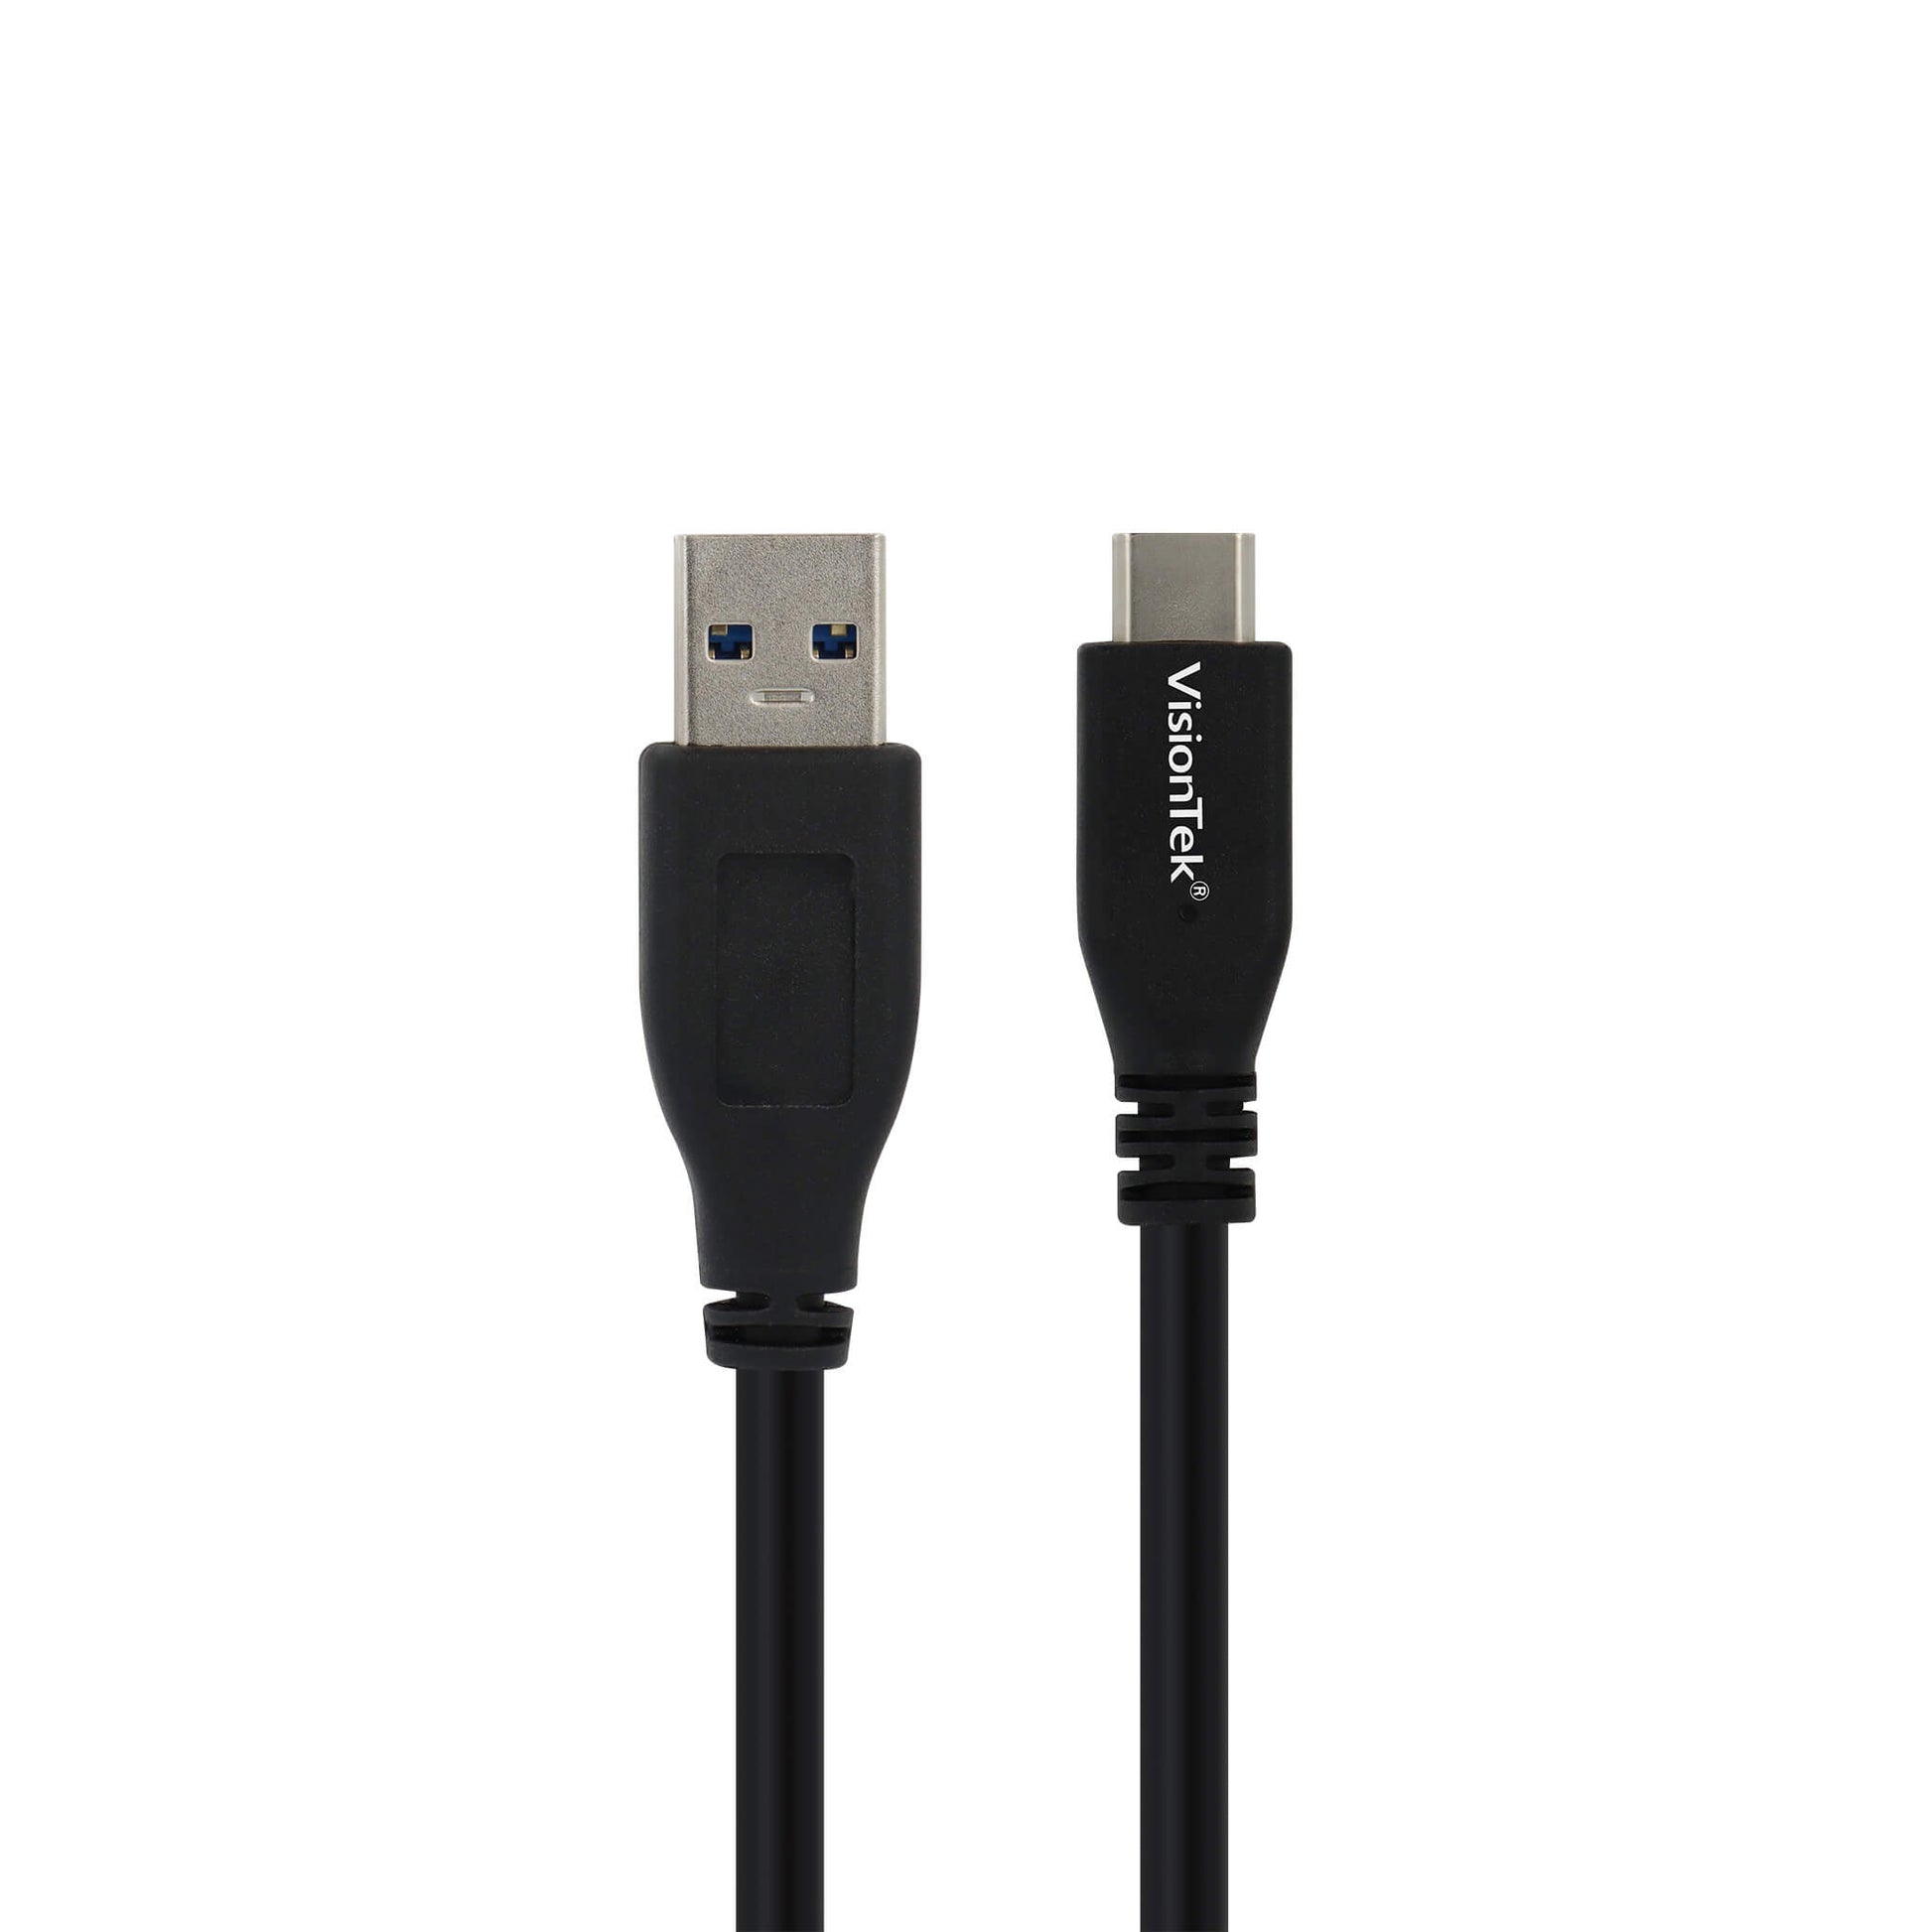 Astrotek USB-C 3.1 Type C Male to USB 3.0 Type A Female OTG Extension Cable  - 1m 